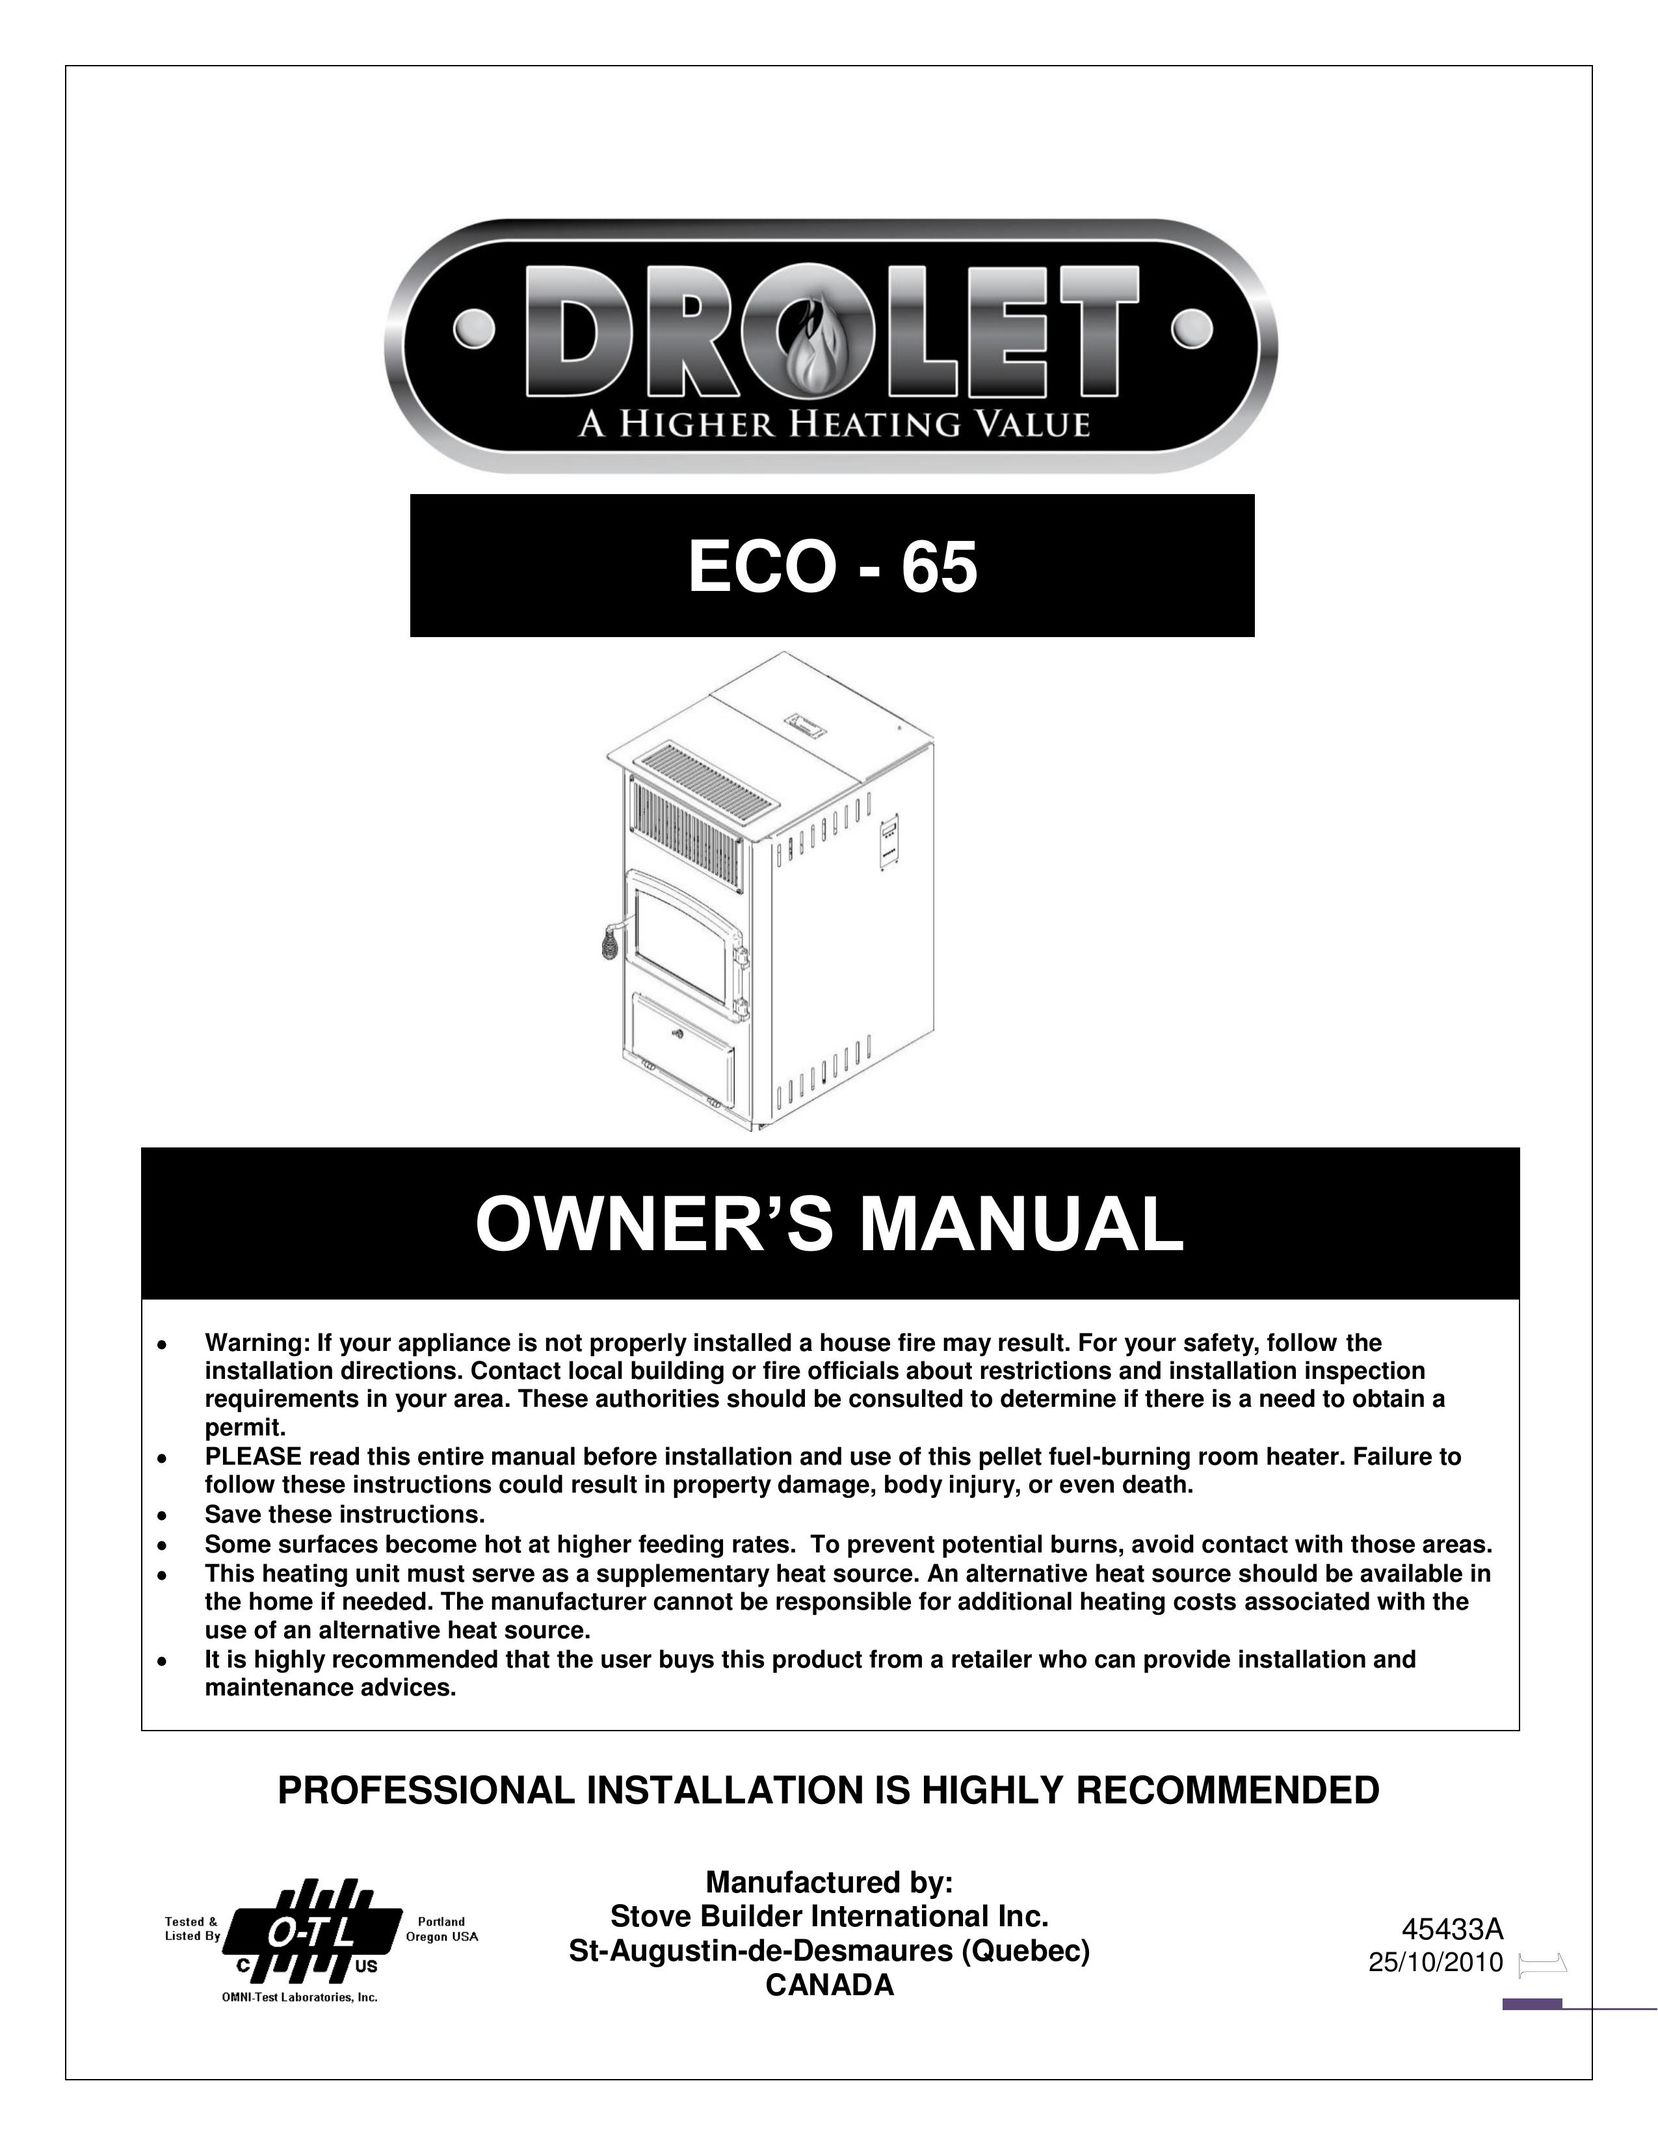 Drolet ECO-65 Stove User Manual